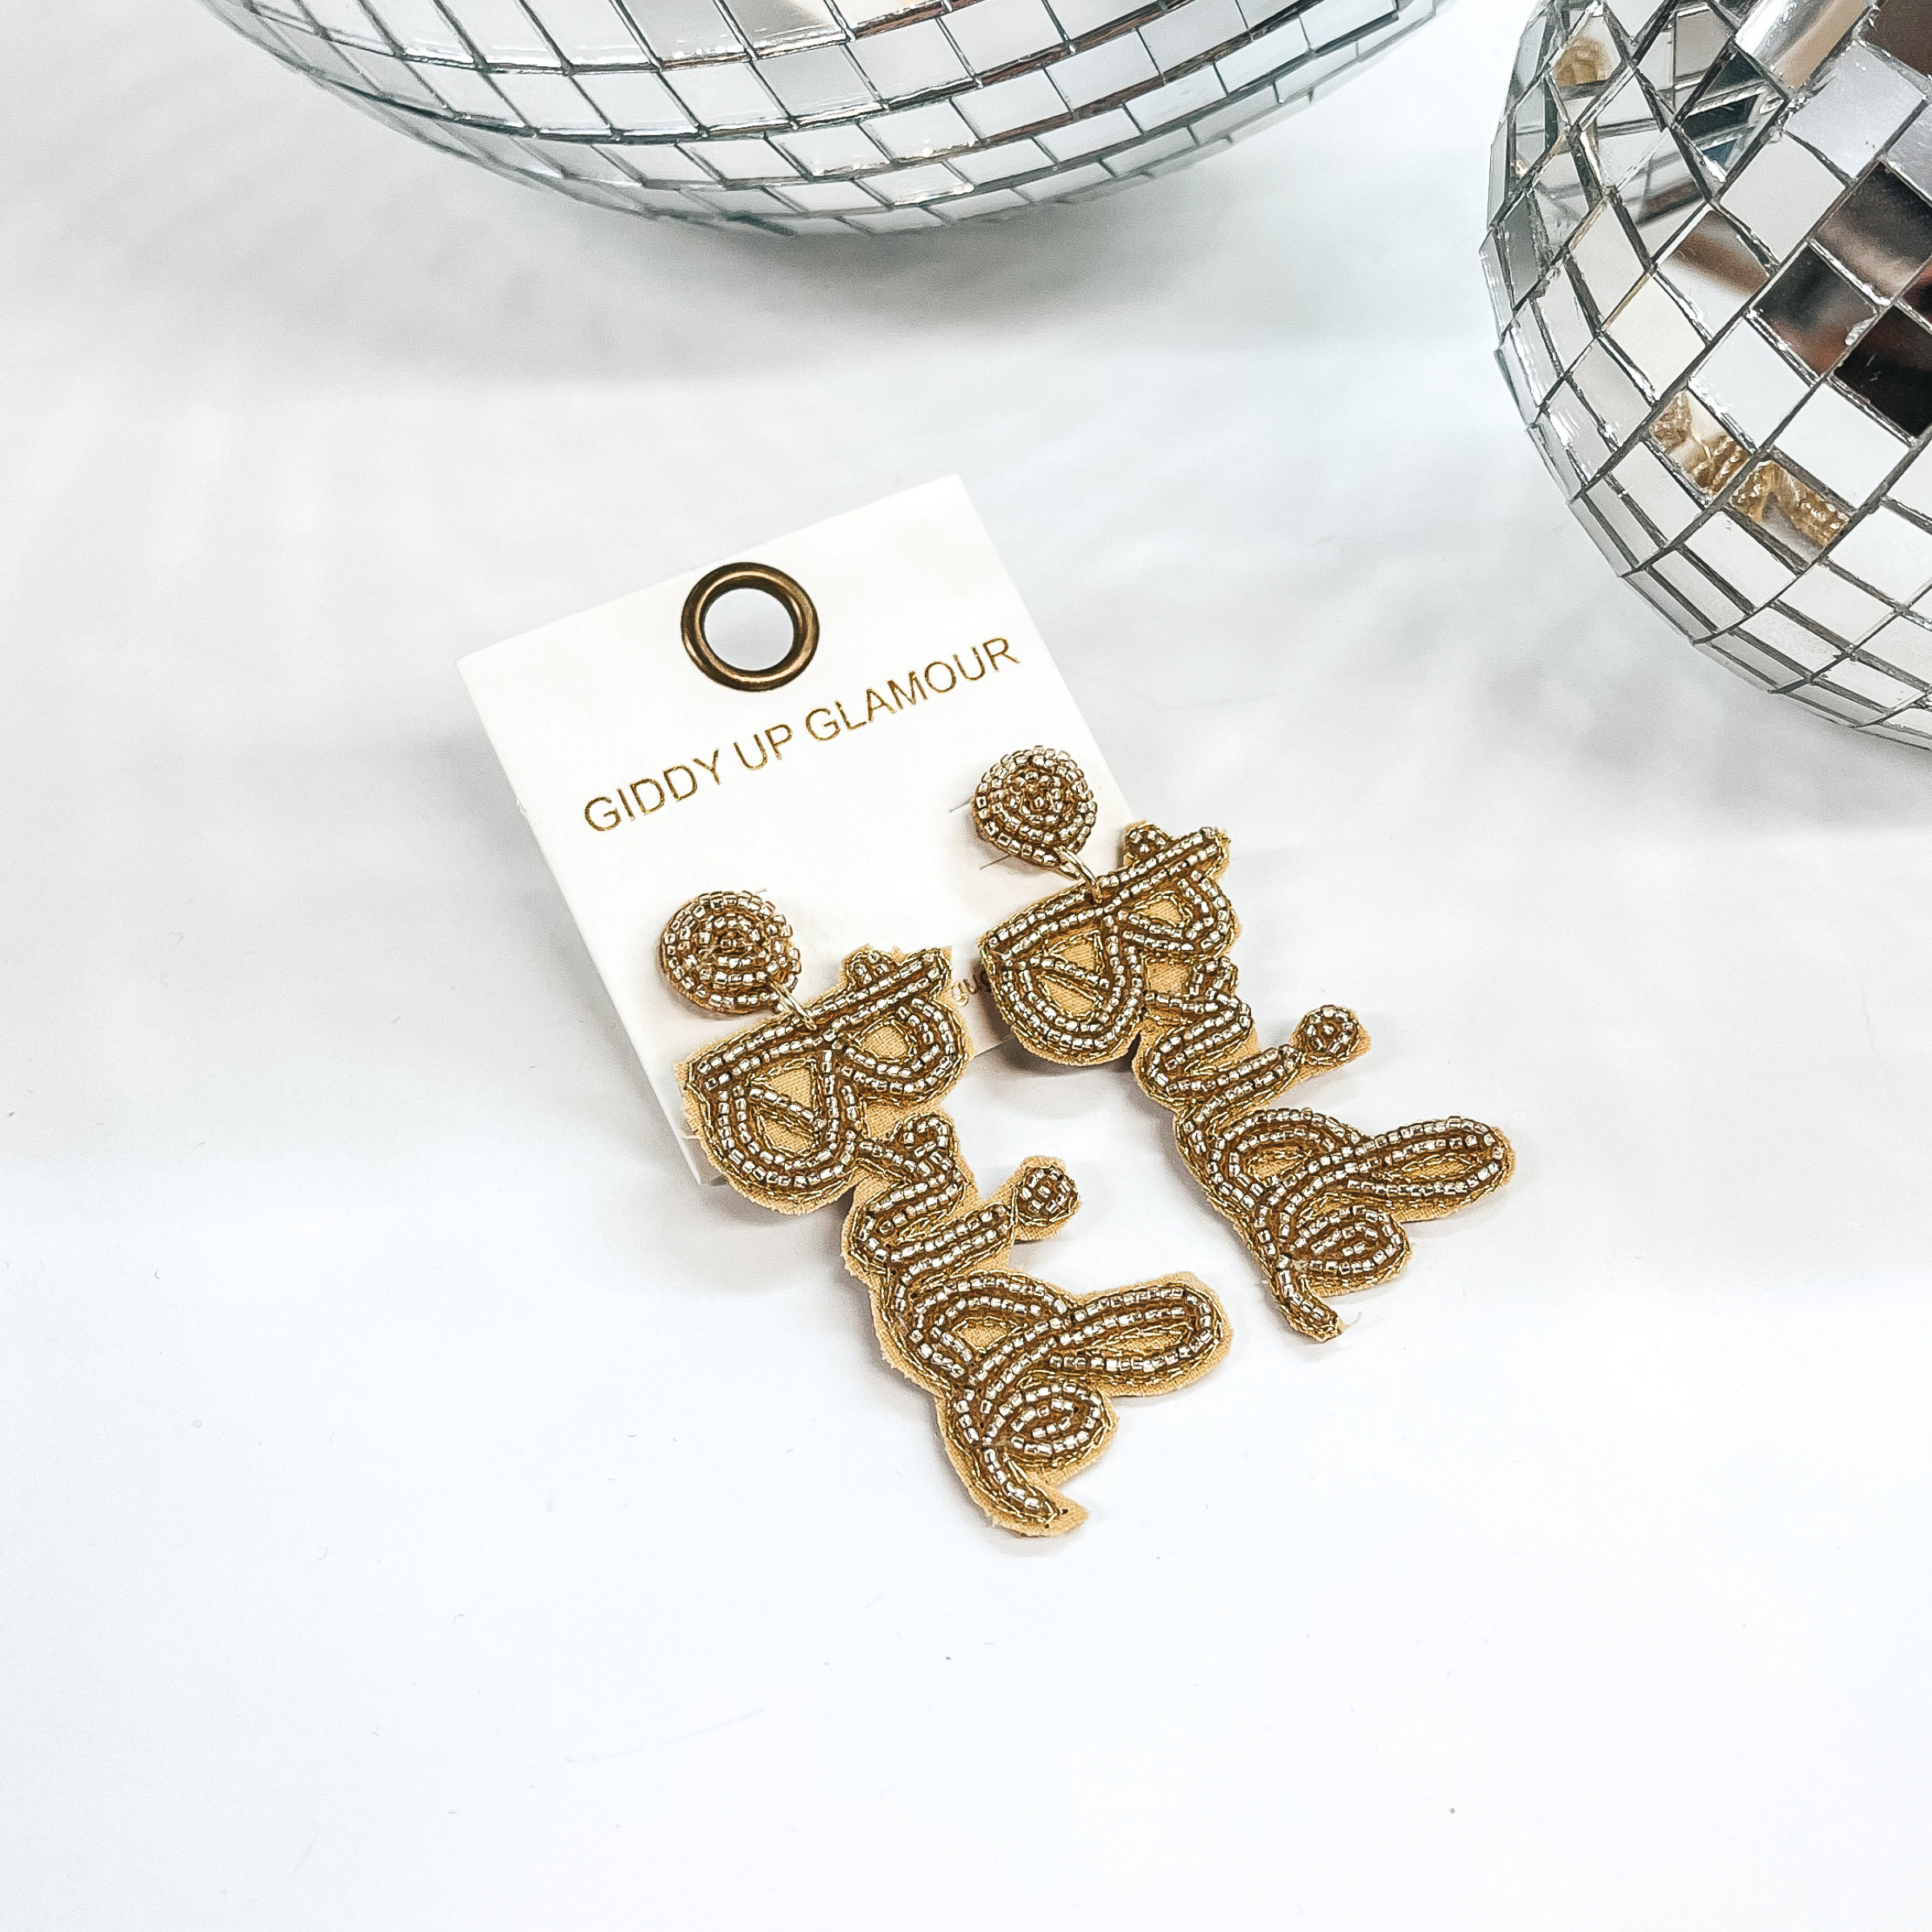 Gold beaded post back earrings with the word 'Bride' in Barbie font. Takn on a white background with two  disco balls in the back as decor.